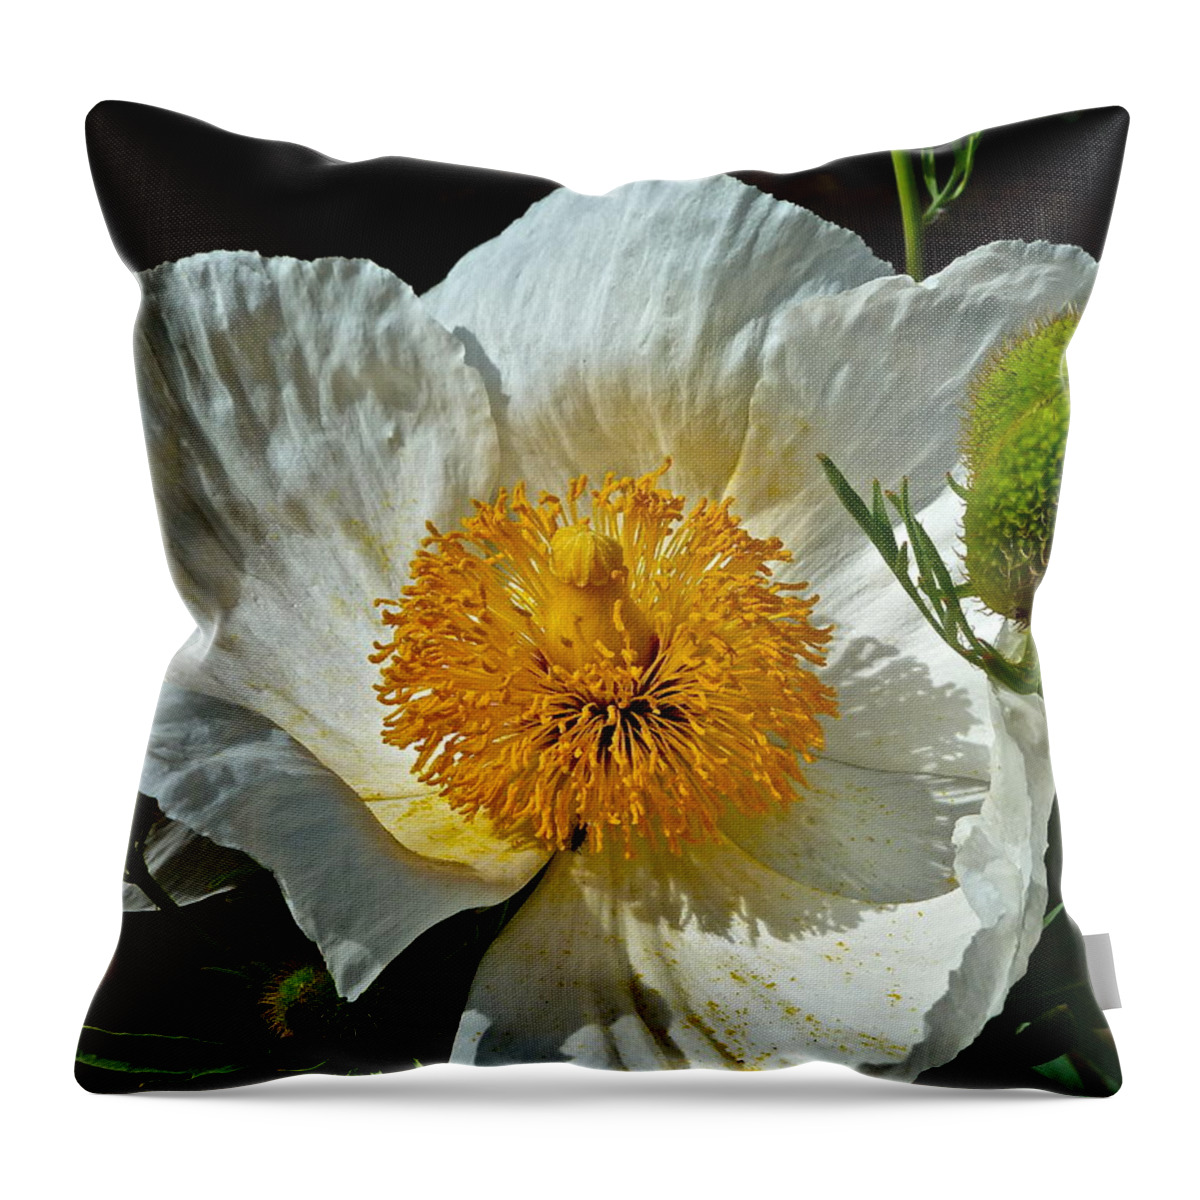 Flowers Throw Pillow featuring the photograph Matilija Poppy Three #1 by Diana Hatcher